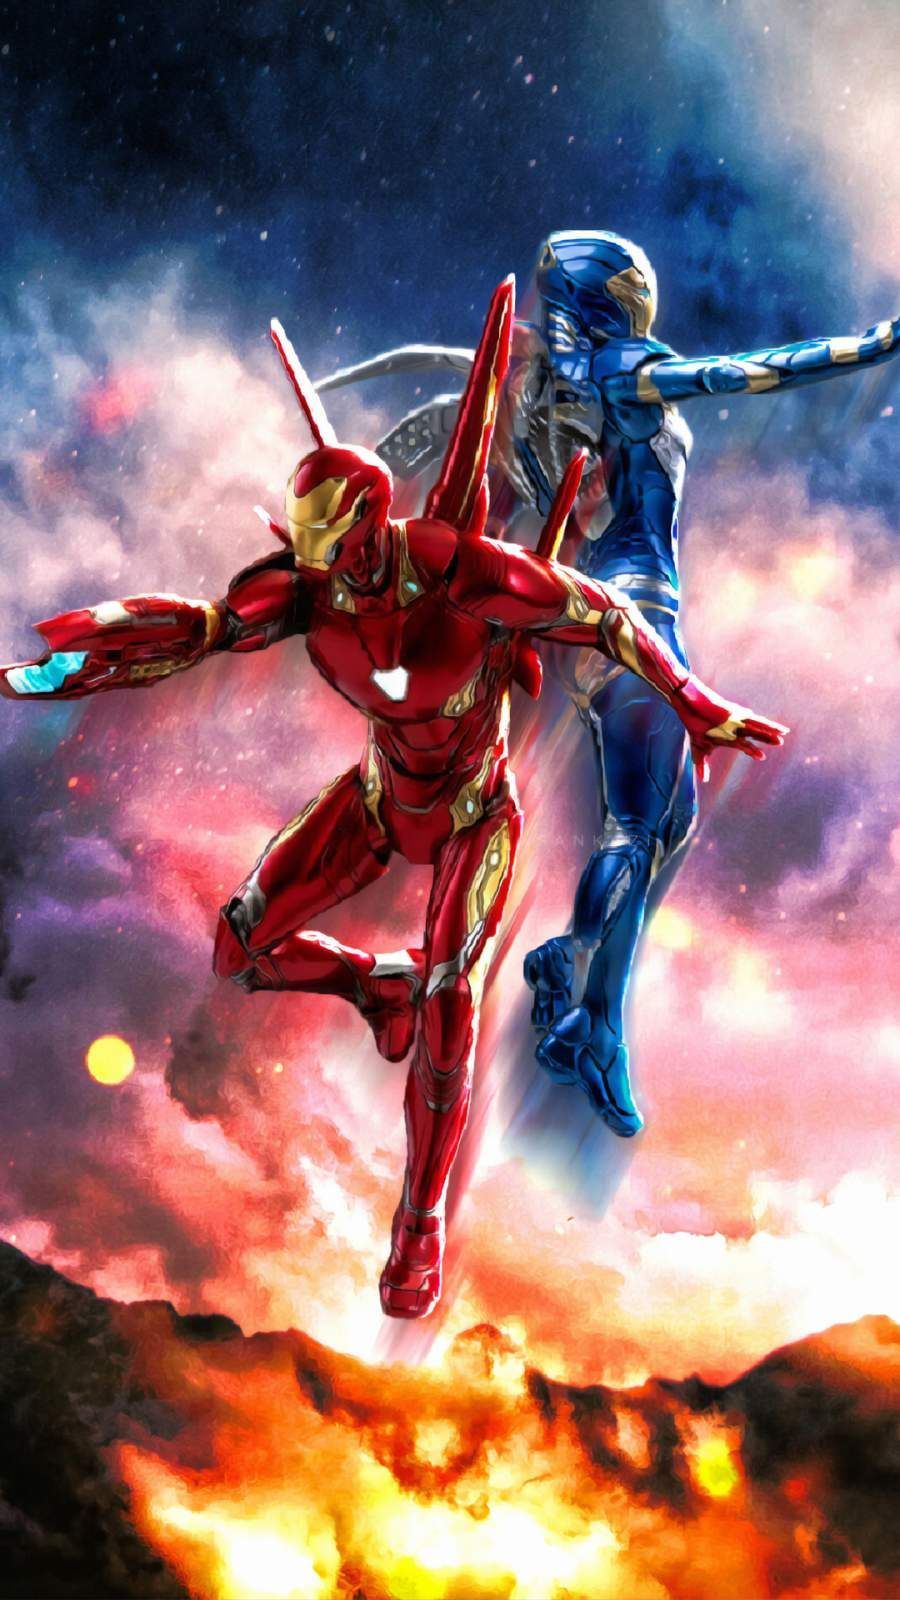 Iron Man and Pepper Potts Rescue Suit iPhone Wallpaper. Marvel iron man, Iron man HD wallpaper, Marvel superhero posters